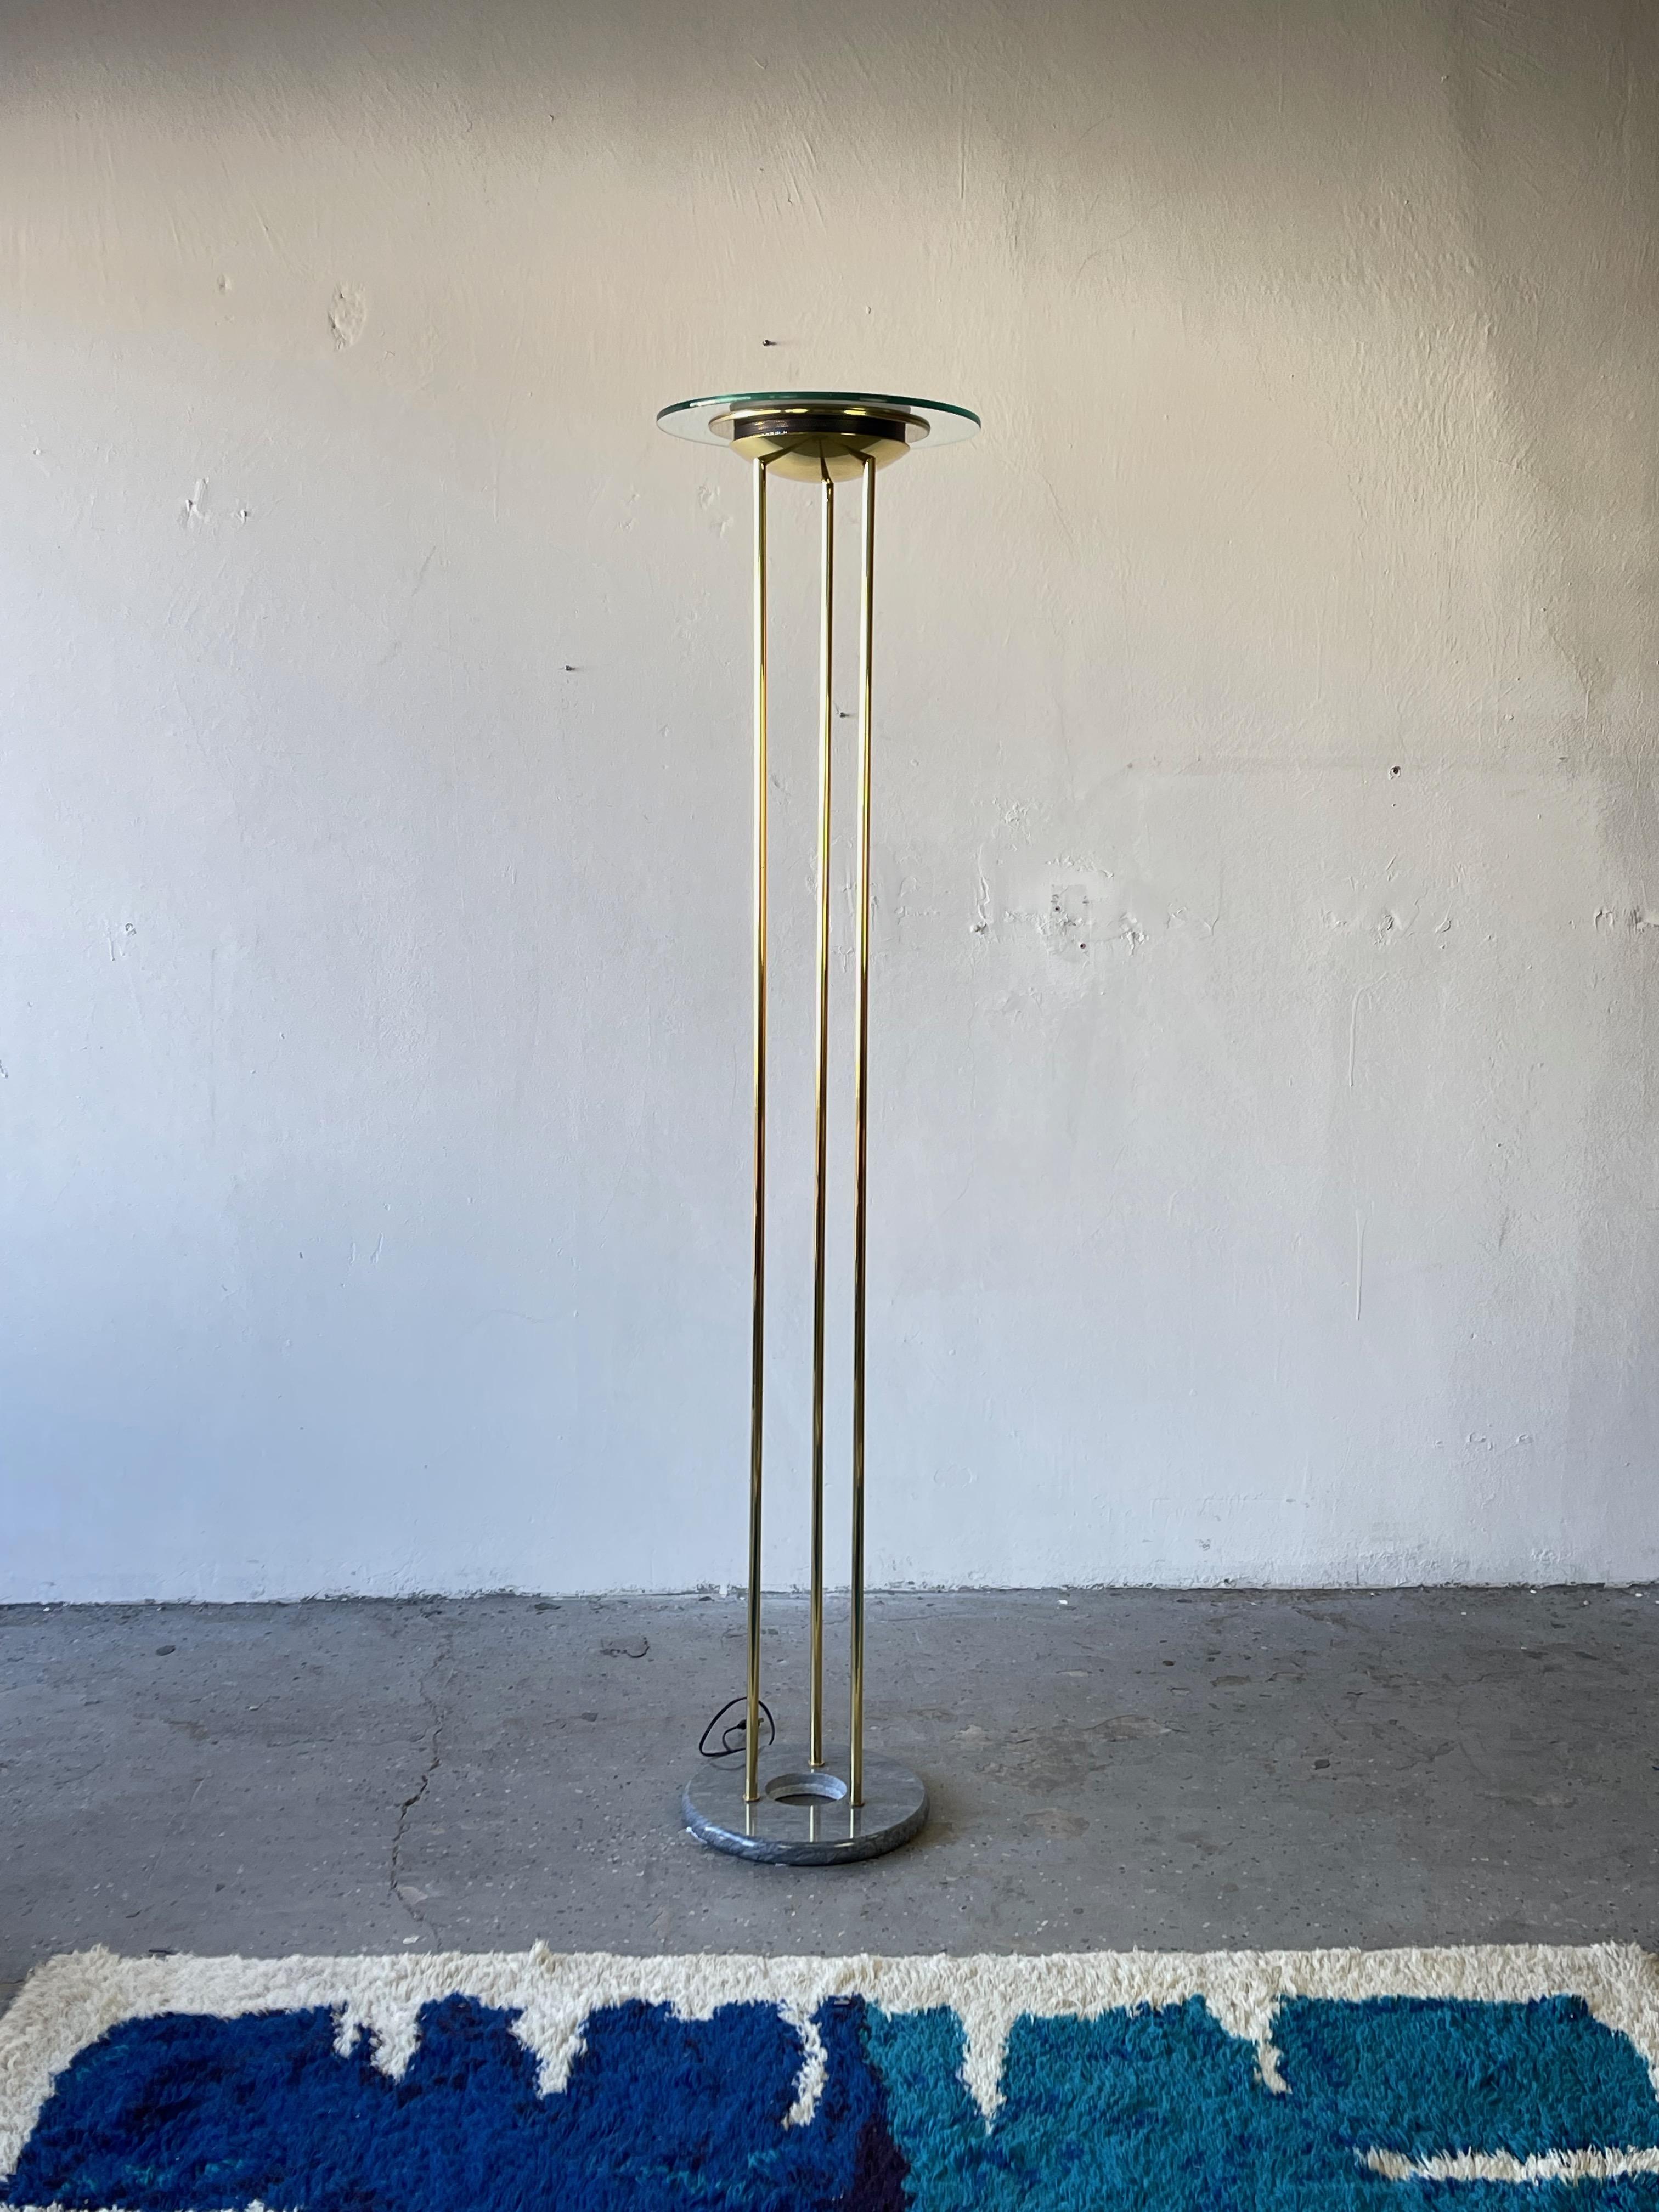 Very striking floor lamp designed by Robert Sonneman for George Kovacs, circa 1980’s. Very well made with polished brass, marble base, green tinted glass reflector

Measures: Height: 73 in.
Diameter: 16 in.

